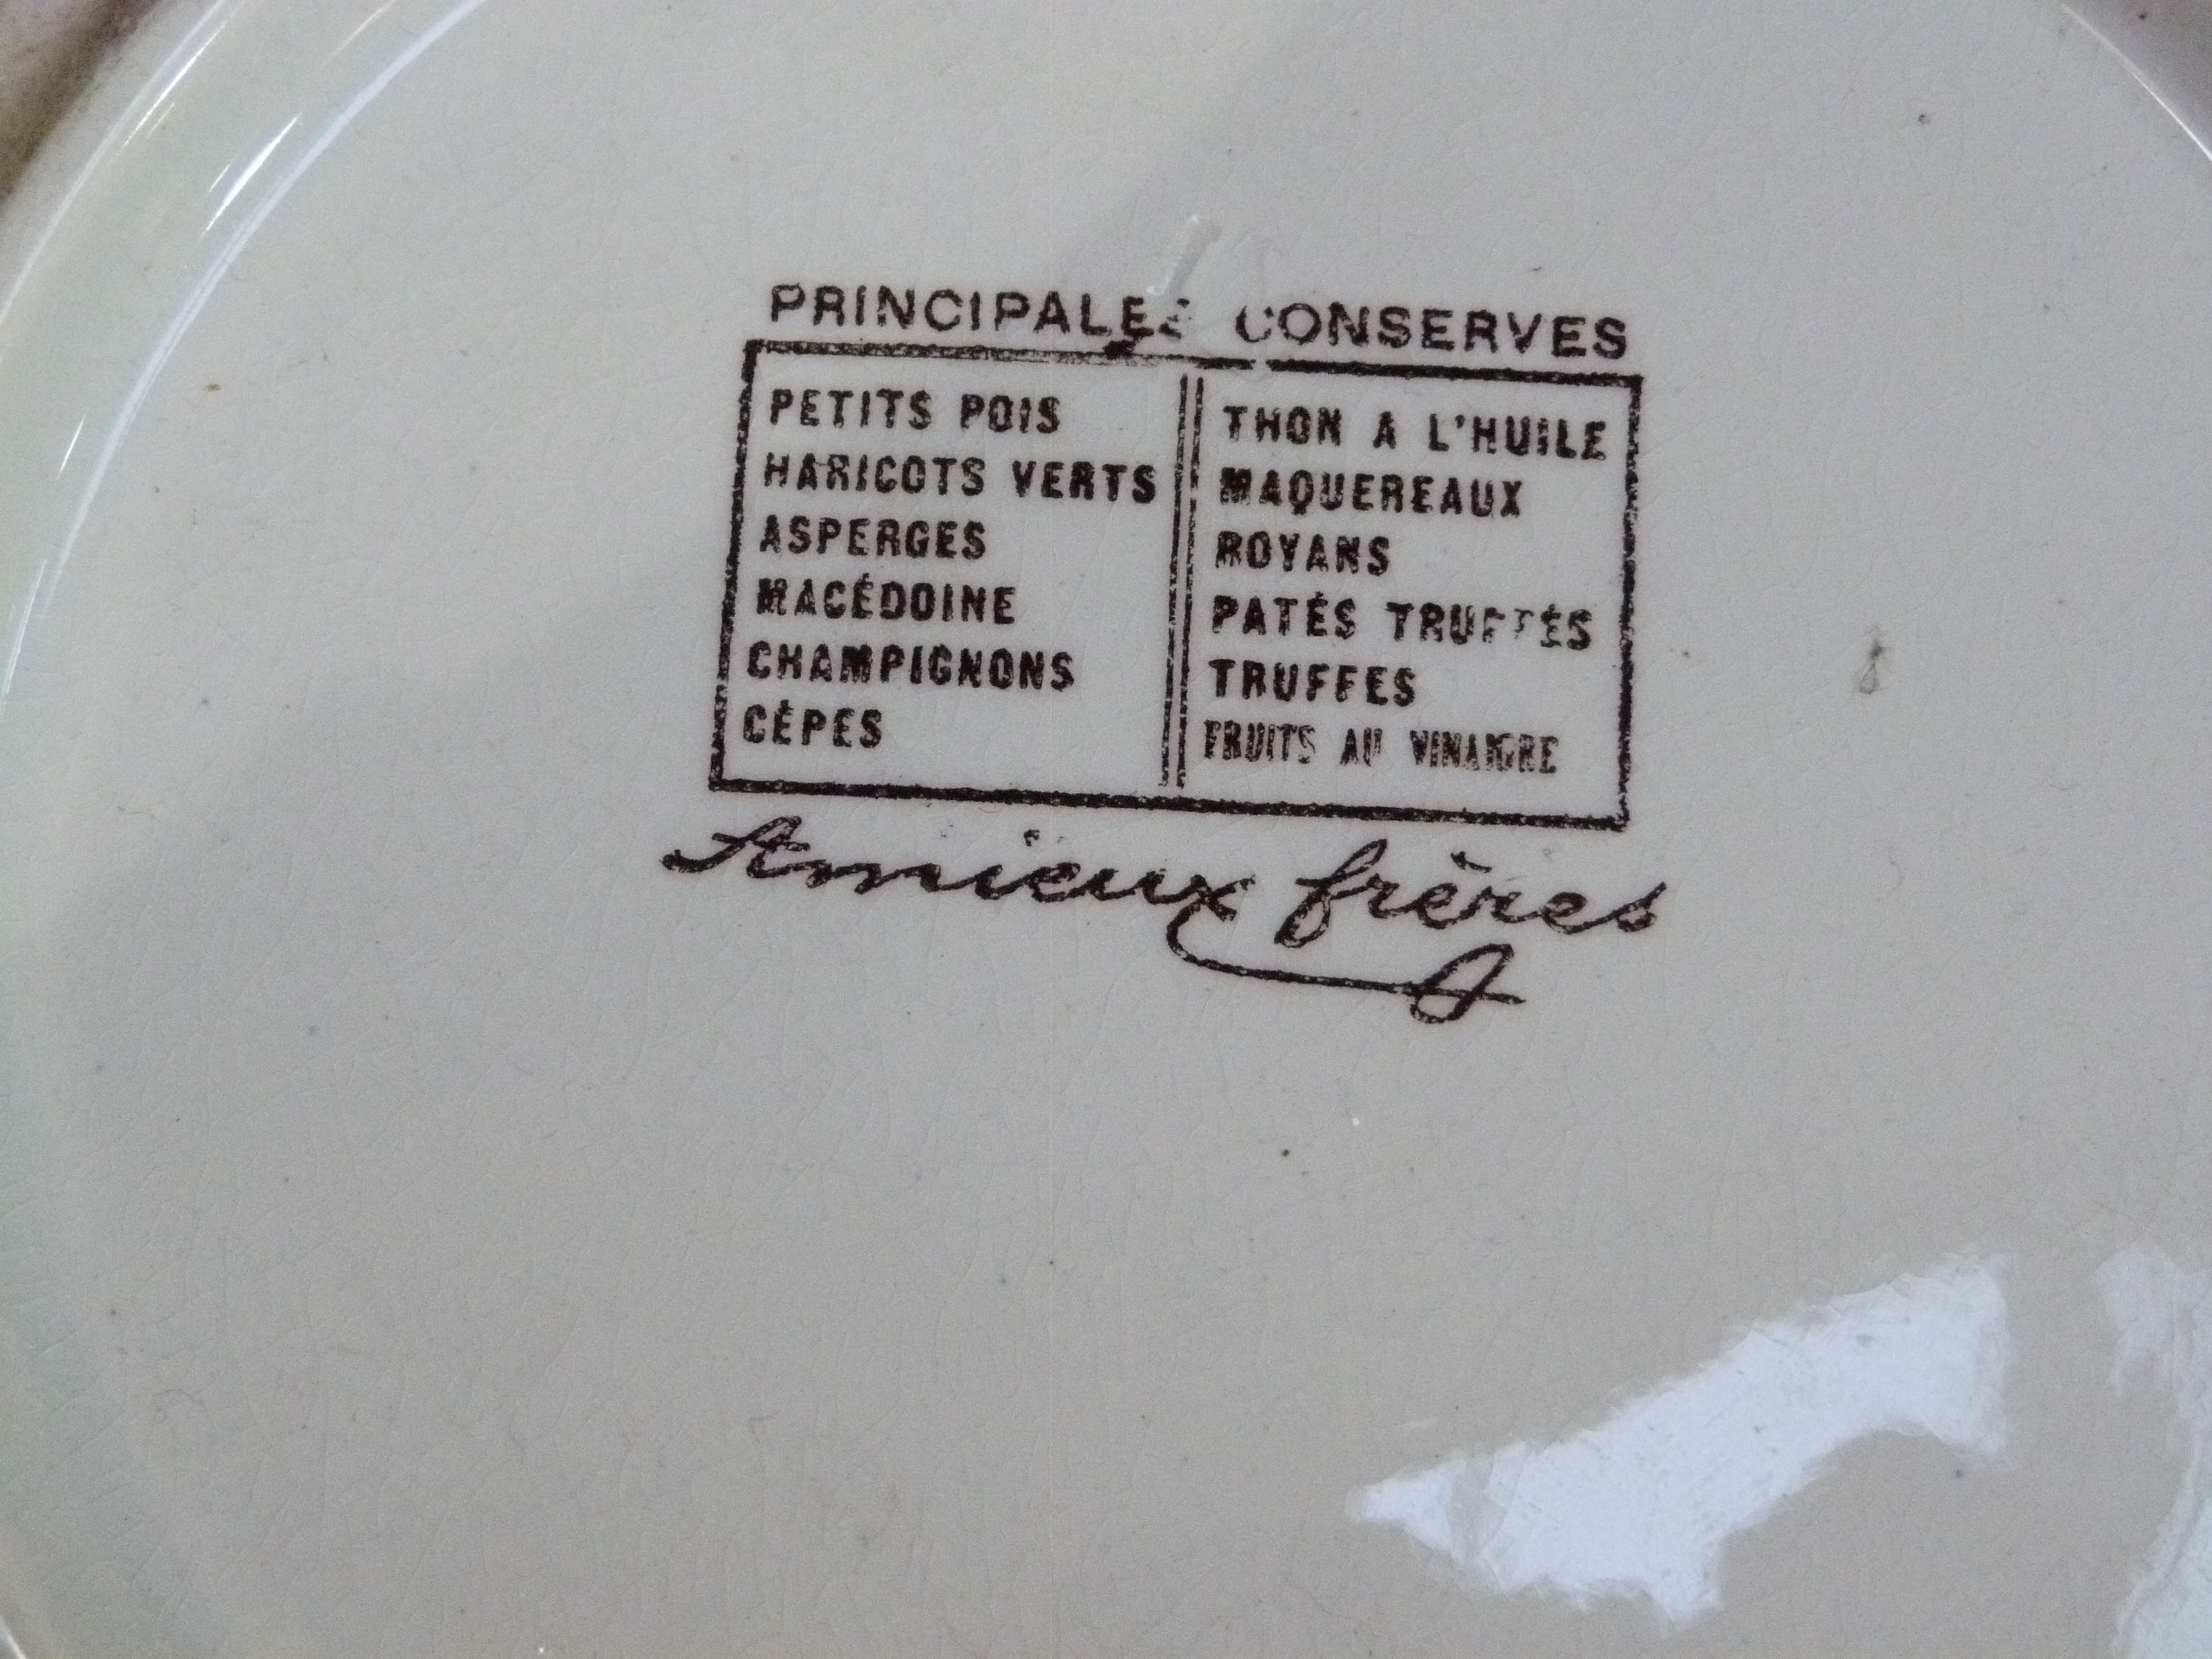 A French sardine dish by Amieux Freres the circular plate moulded with four sardines printed and - Image 2 of 2